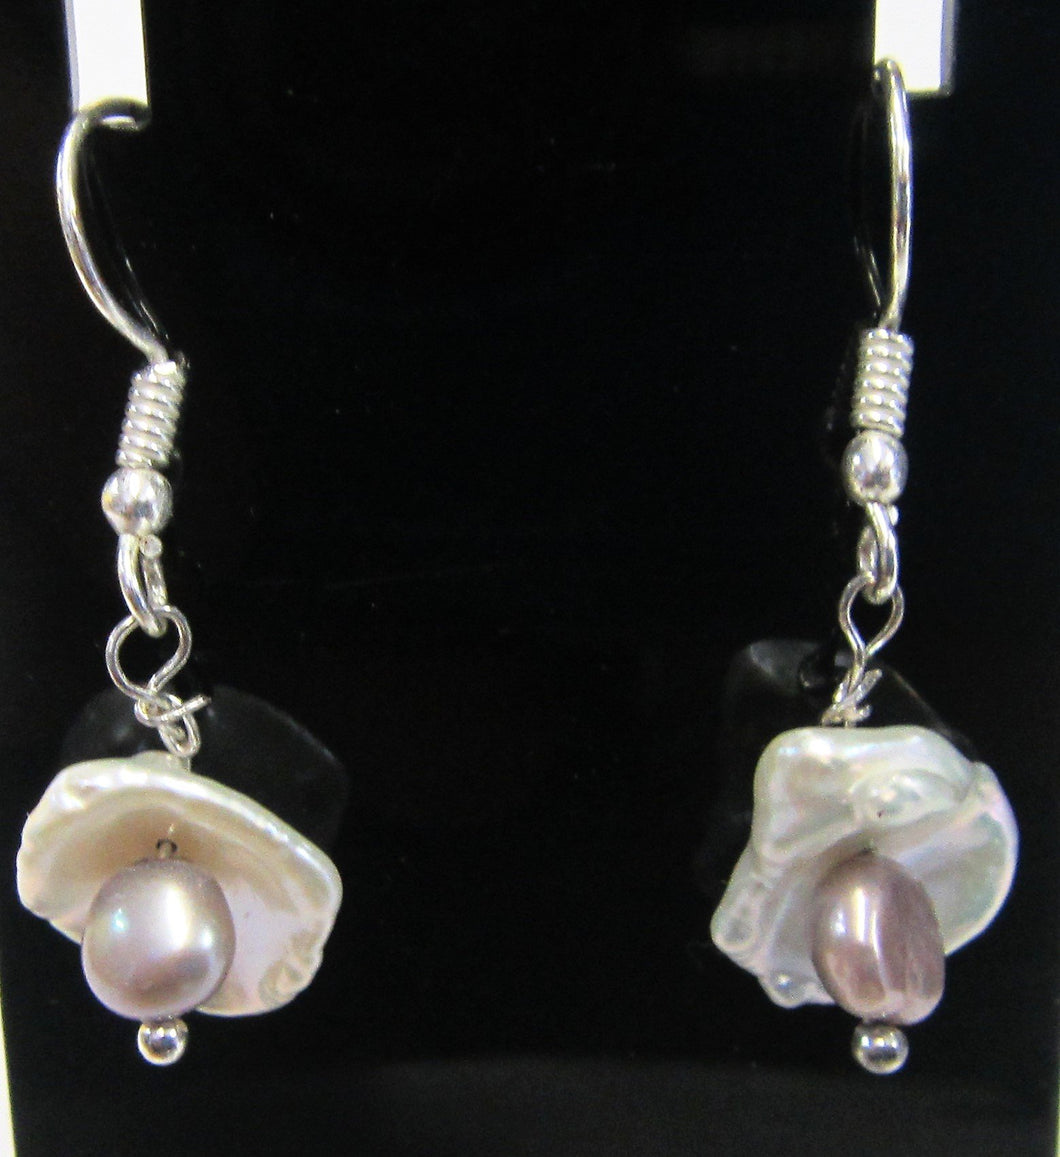 Handcrafted pearl dish earrings on 925 sterling silver hooks